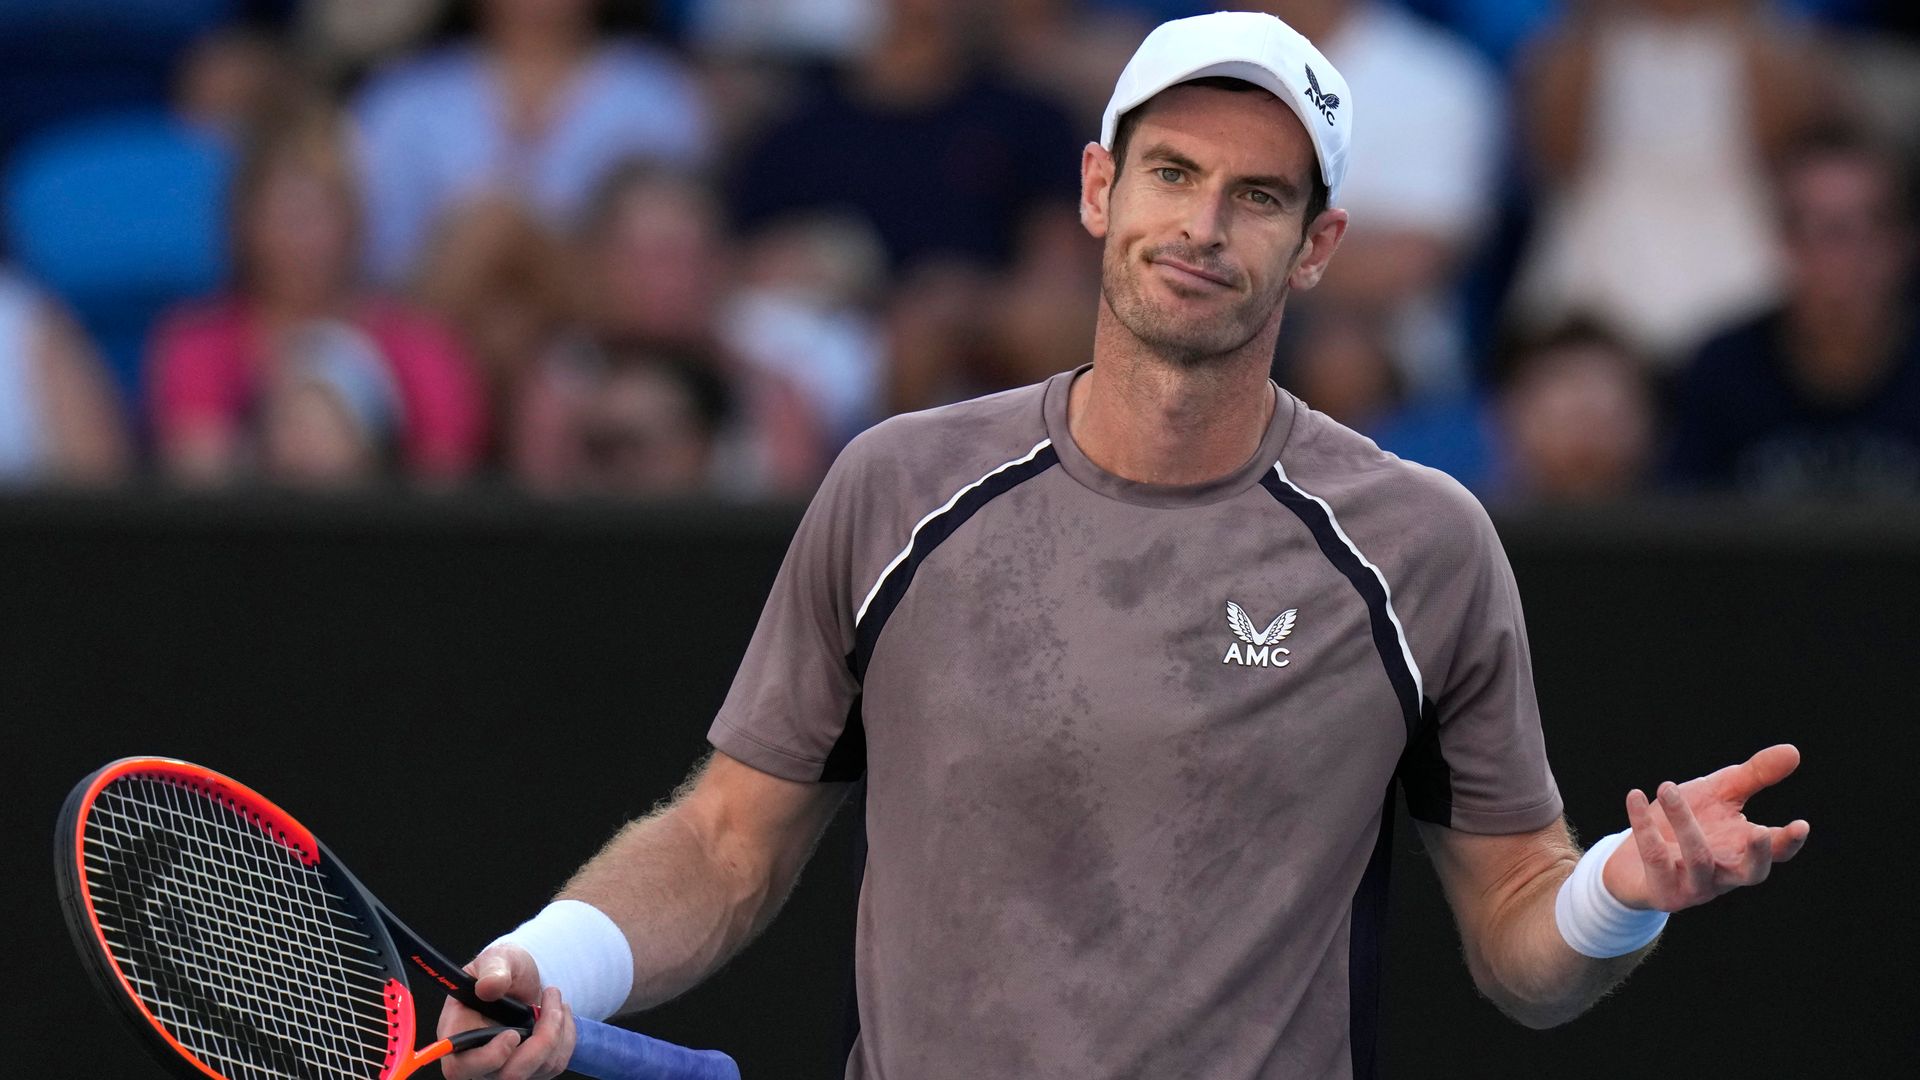 Murray suffers painful first-round exit at Australian Open